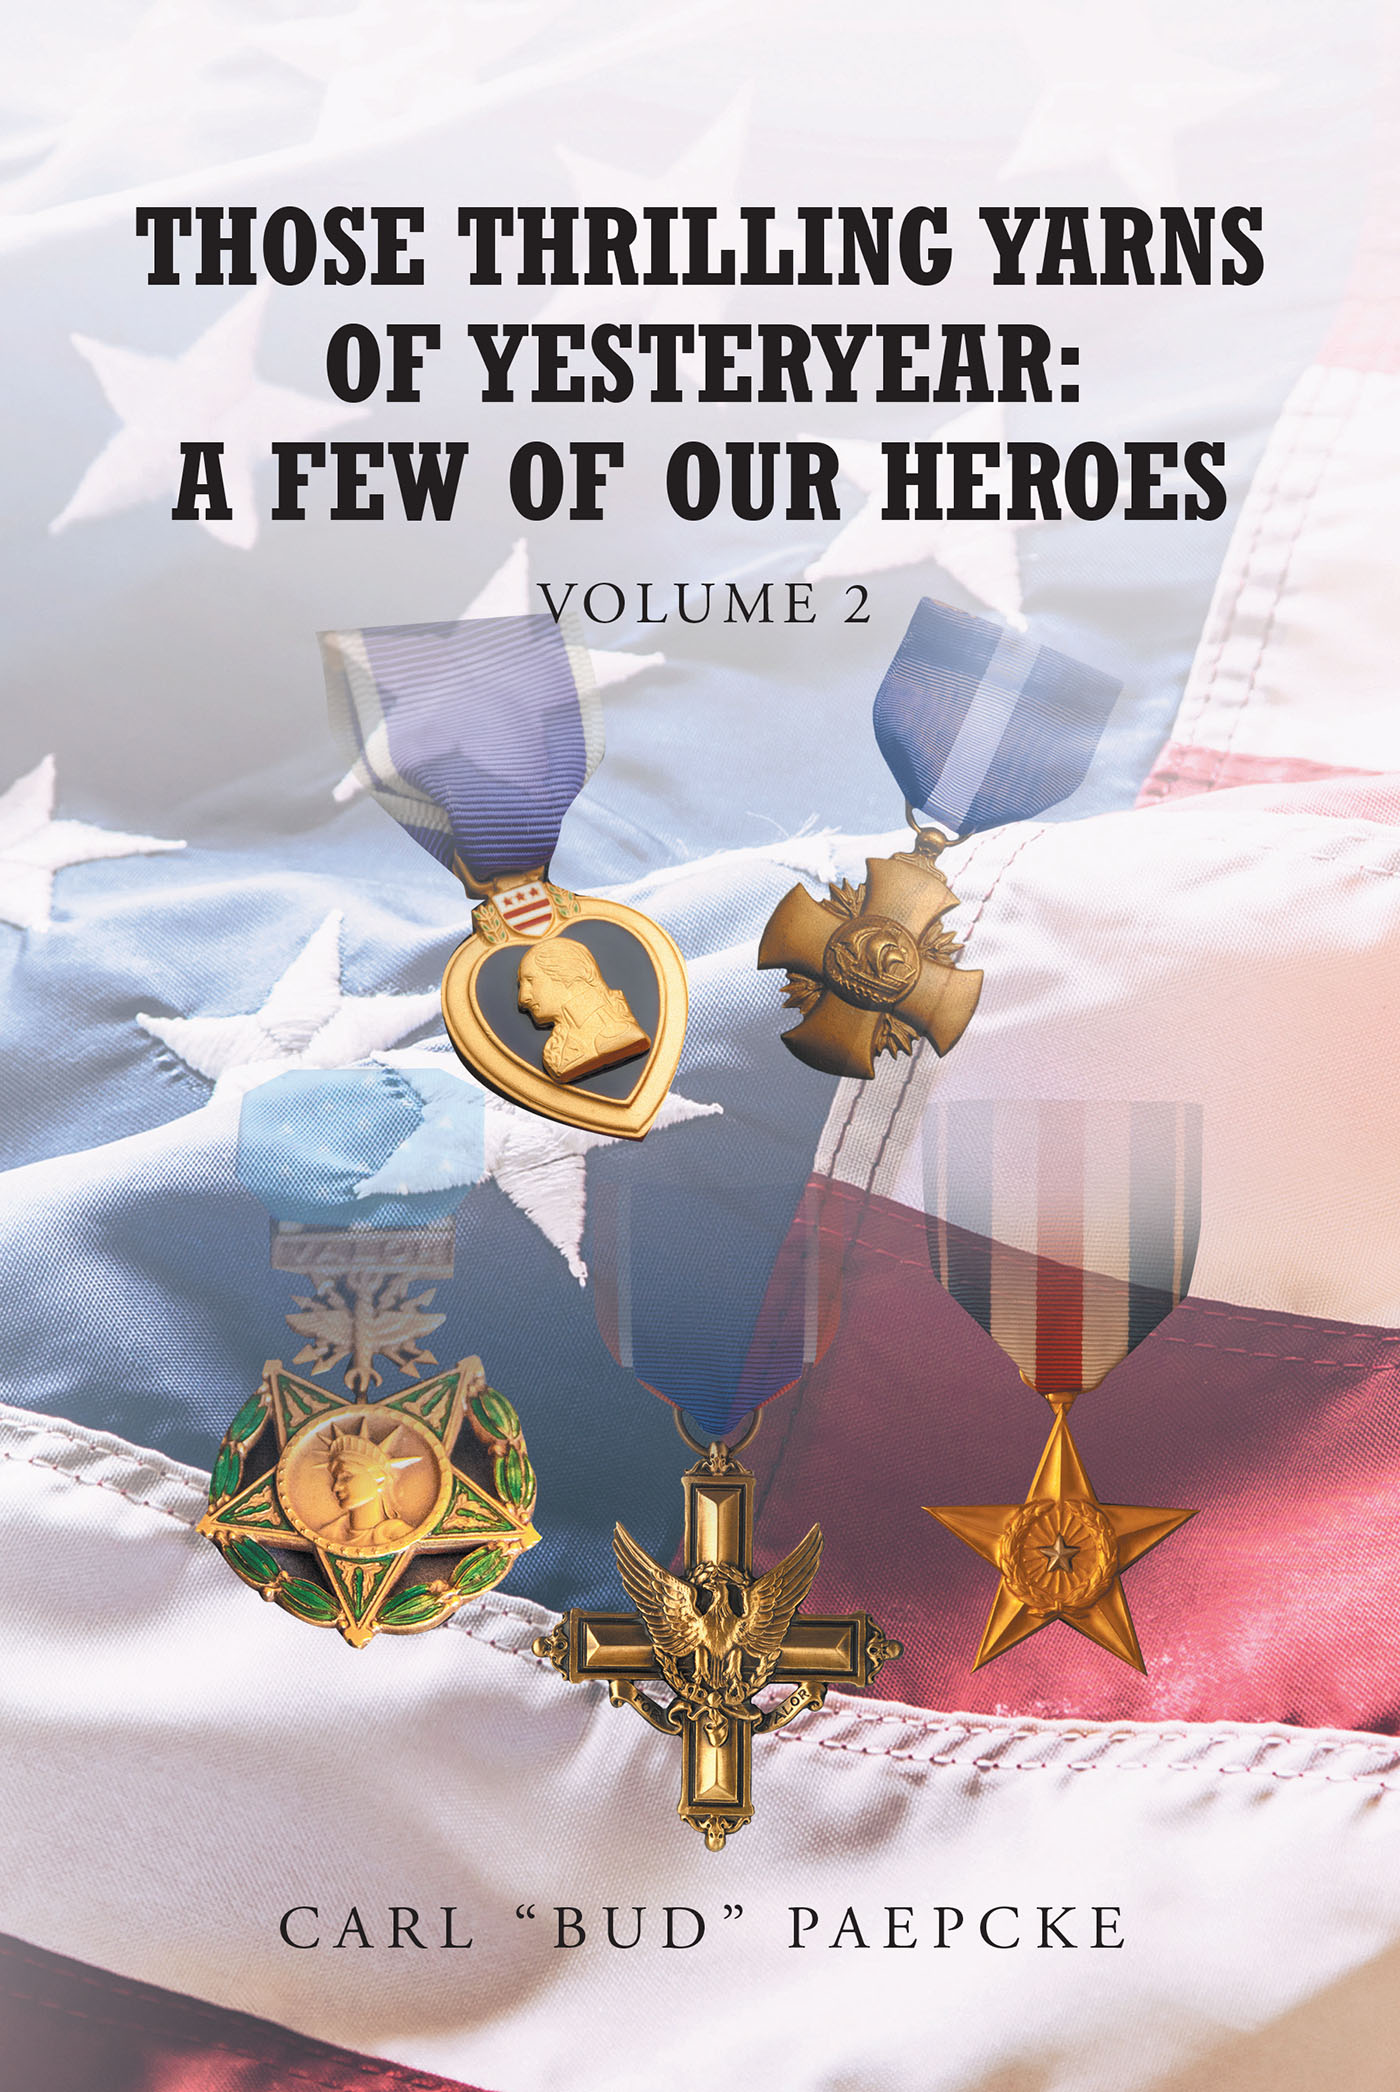 Carl "Bud" Paepcke’s New Book, "Those Thrilling Yarns of Yesteryear Volume 2," Explores the Acts of Heroes Who Risked Their Lives to Defend America's Freedom & Democracy